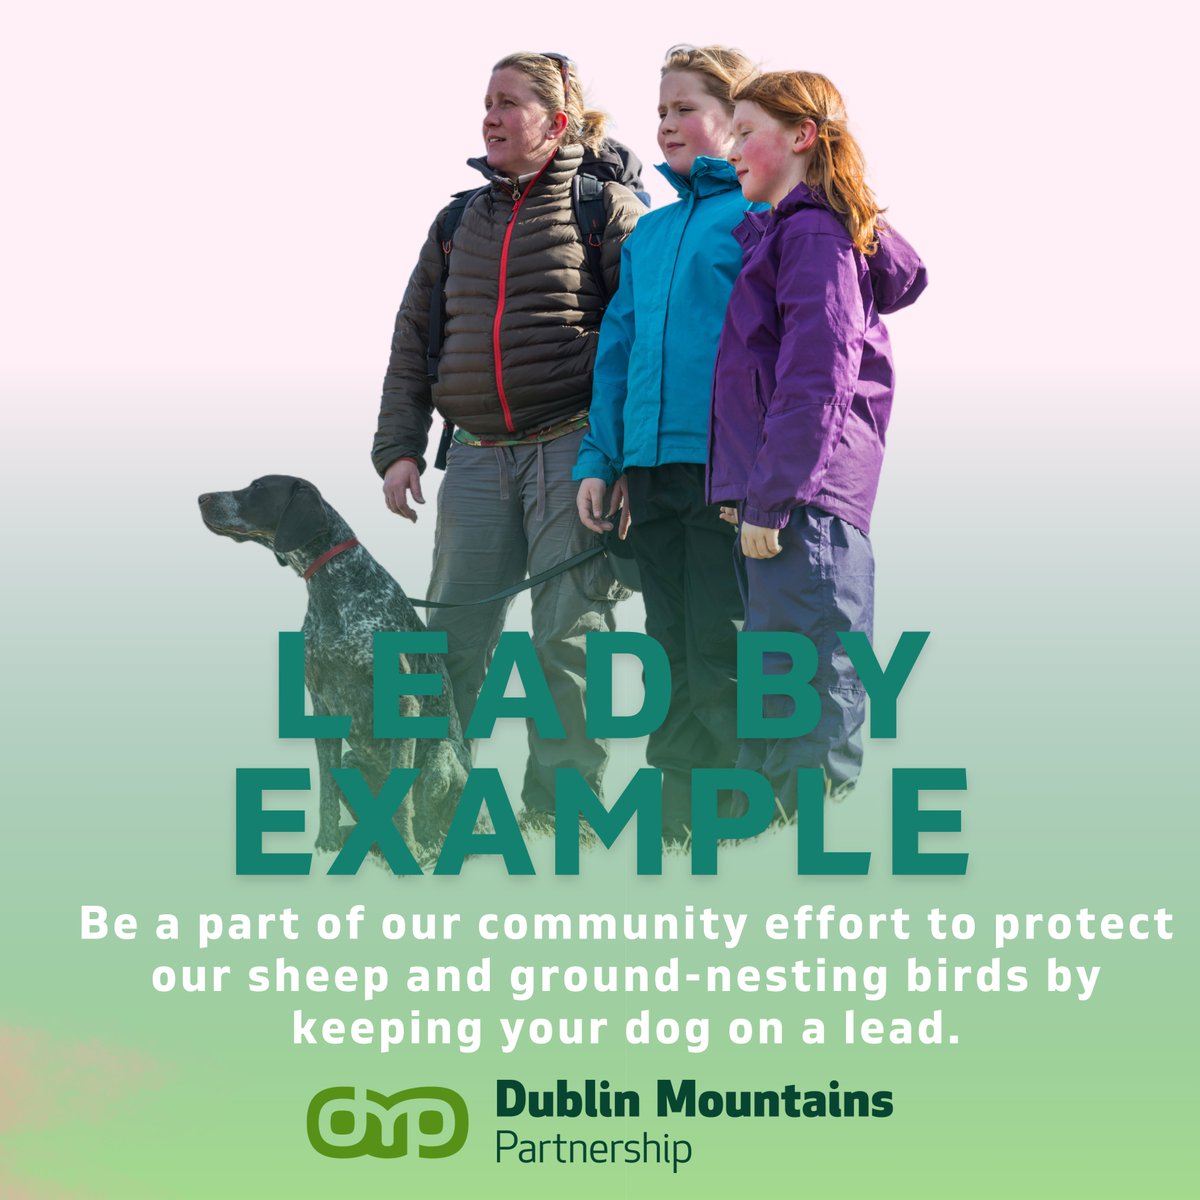 Your actions inspire others. By keeping your dog on a lead, you set a positive example for responsible enjoyment of our natural heritage 🍂 Thank you for being a part of our community effort to protect sheep & ground-nesting birds🐑 Visit dublinmountains.ie #LeadByExample